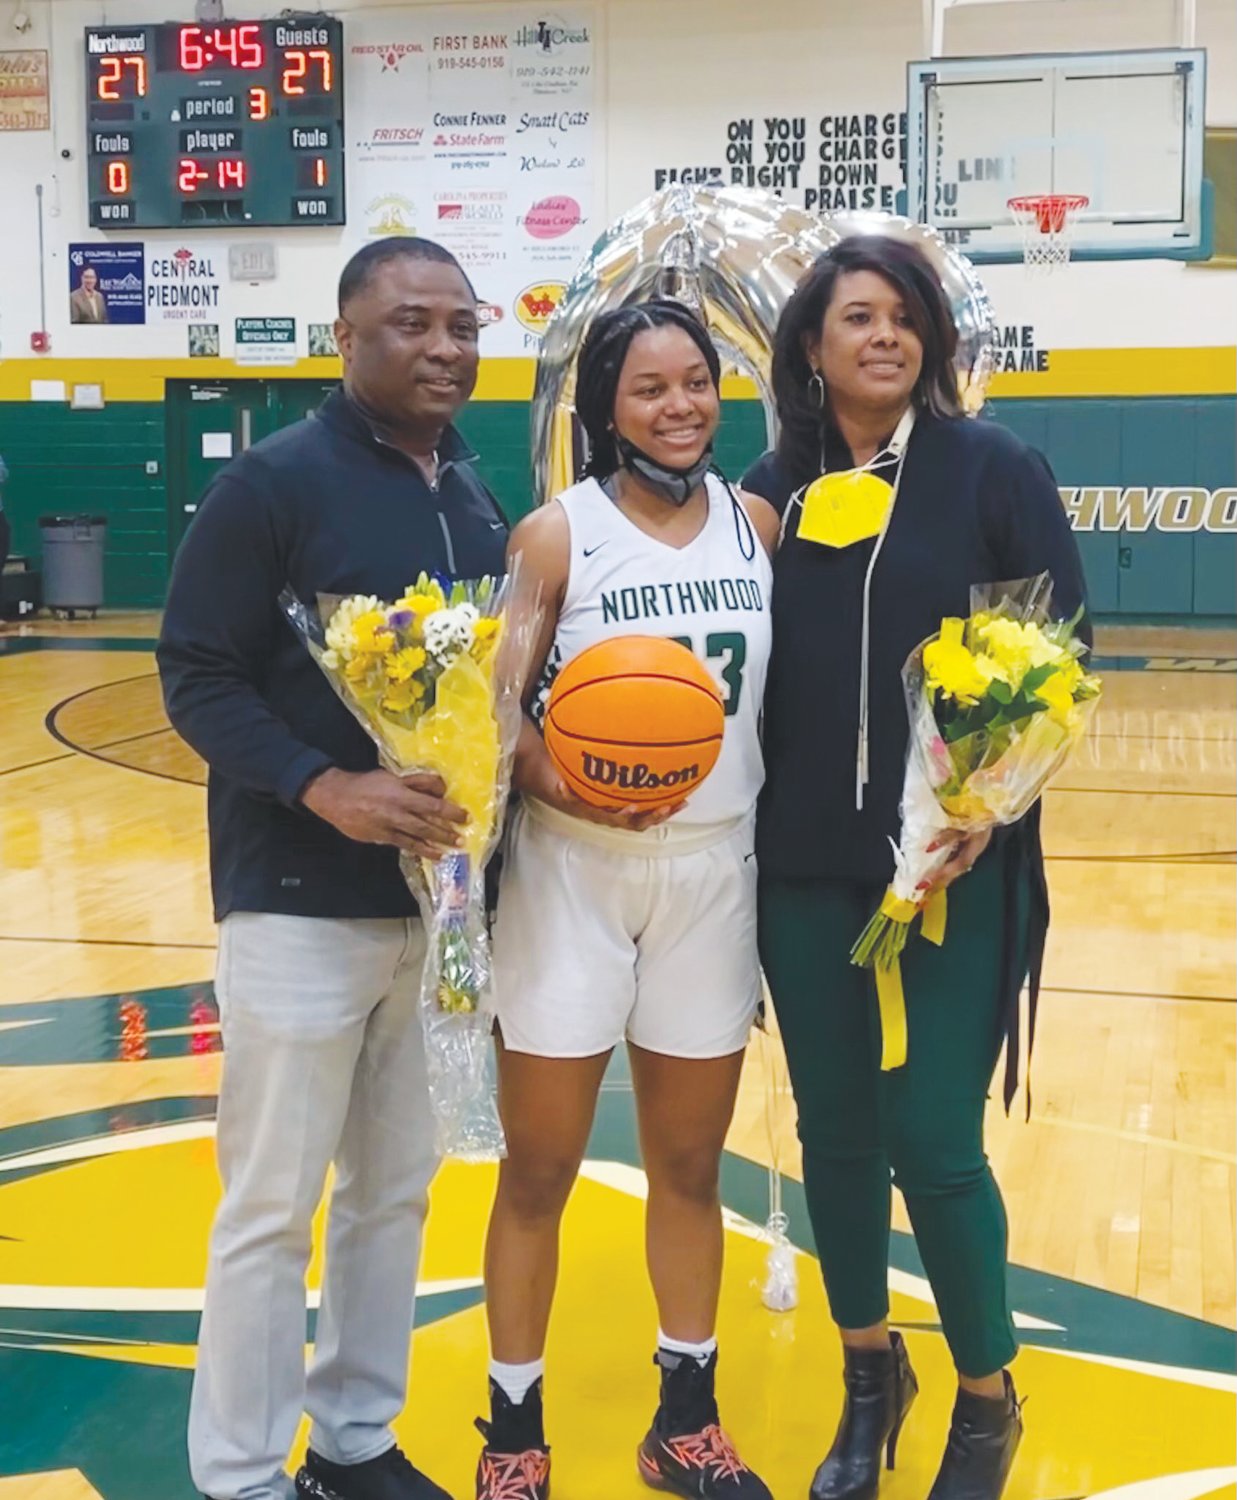 Northwood senior Olivia Porter (center) poses for photos at mid-court with her father, Larry Porter (left), and her mother, Sharmane Porter, during the third quarter of the Chargers' 59-47 win over Panther Creek last Wednesday. Porter scored her 2,000th career point in the second quarter, prompting Northwood Athletic Director Cameron Vernon to honor her during a timeout in the second half.